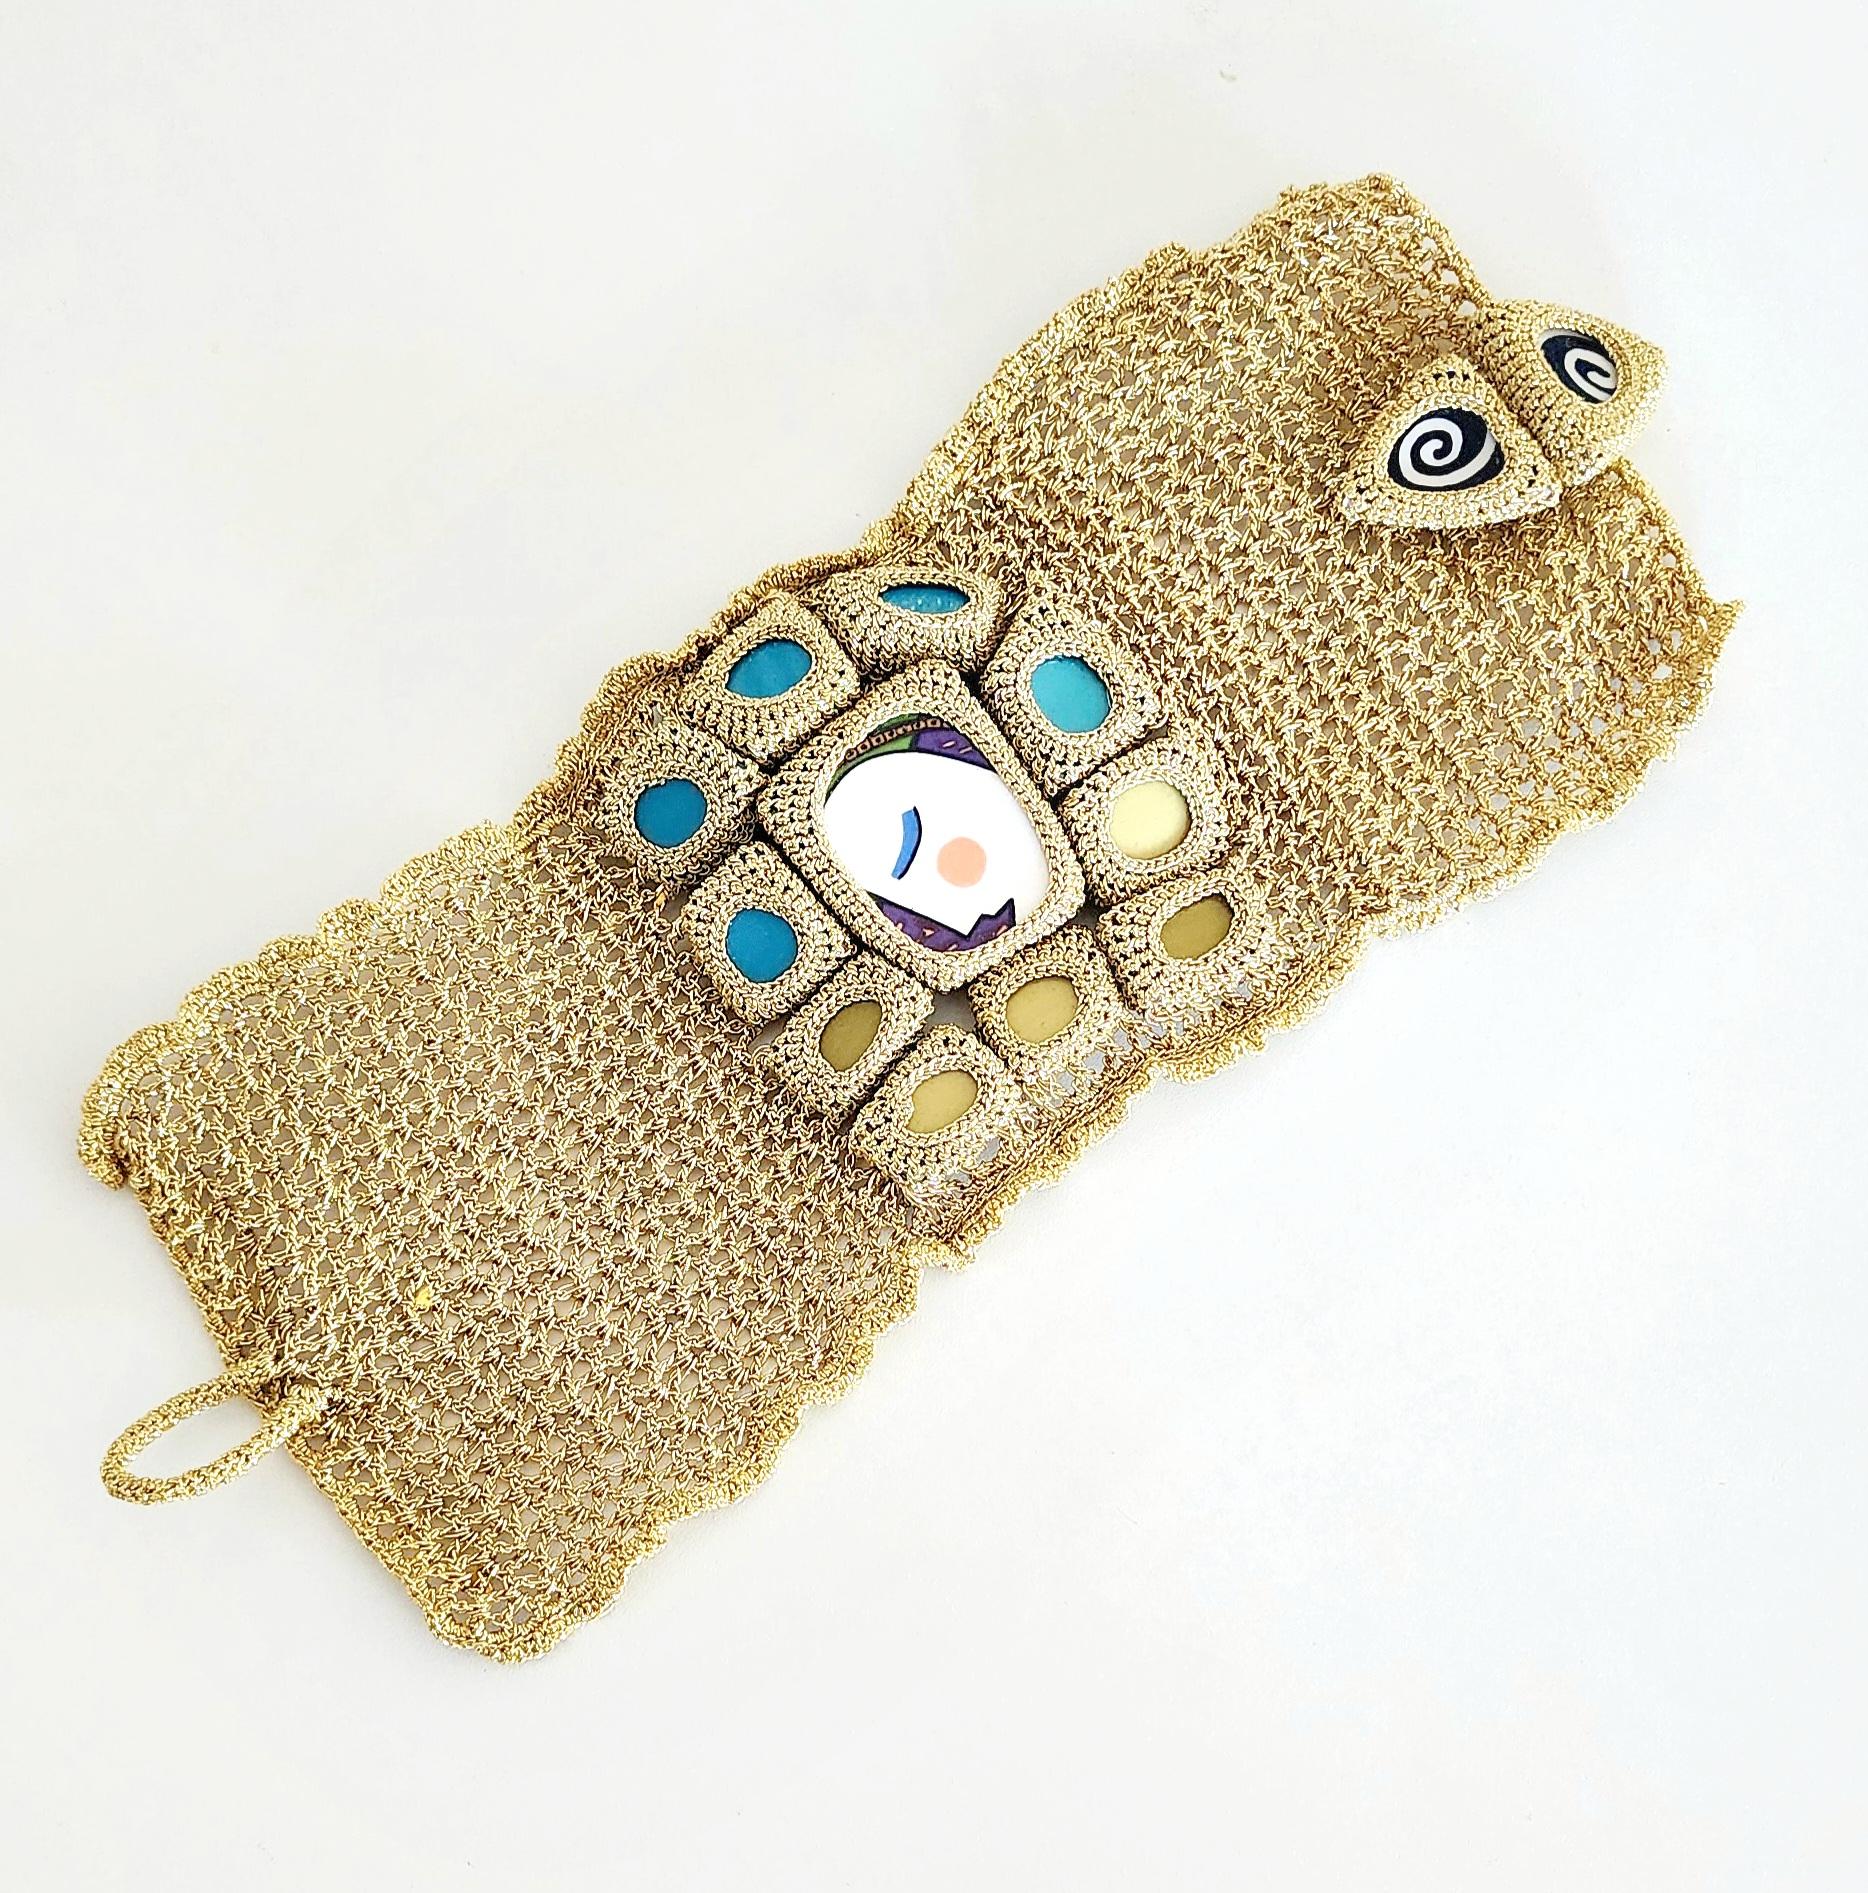 One of a kind cut ceramics crochet bracelet. This bracelet is a part of my Kintsugi collection. I had to smooth the sharp edges of each tile and then I crochet it with a golden smooth passing thread. Kintsugi comes from the Japanese Kin (gold) and